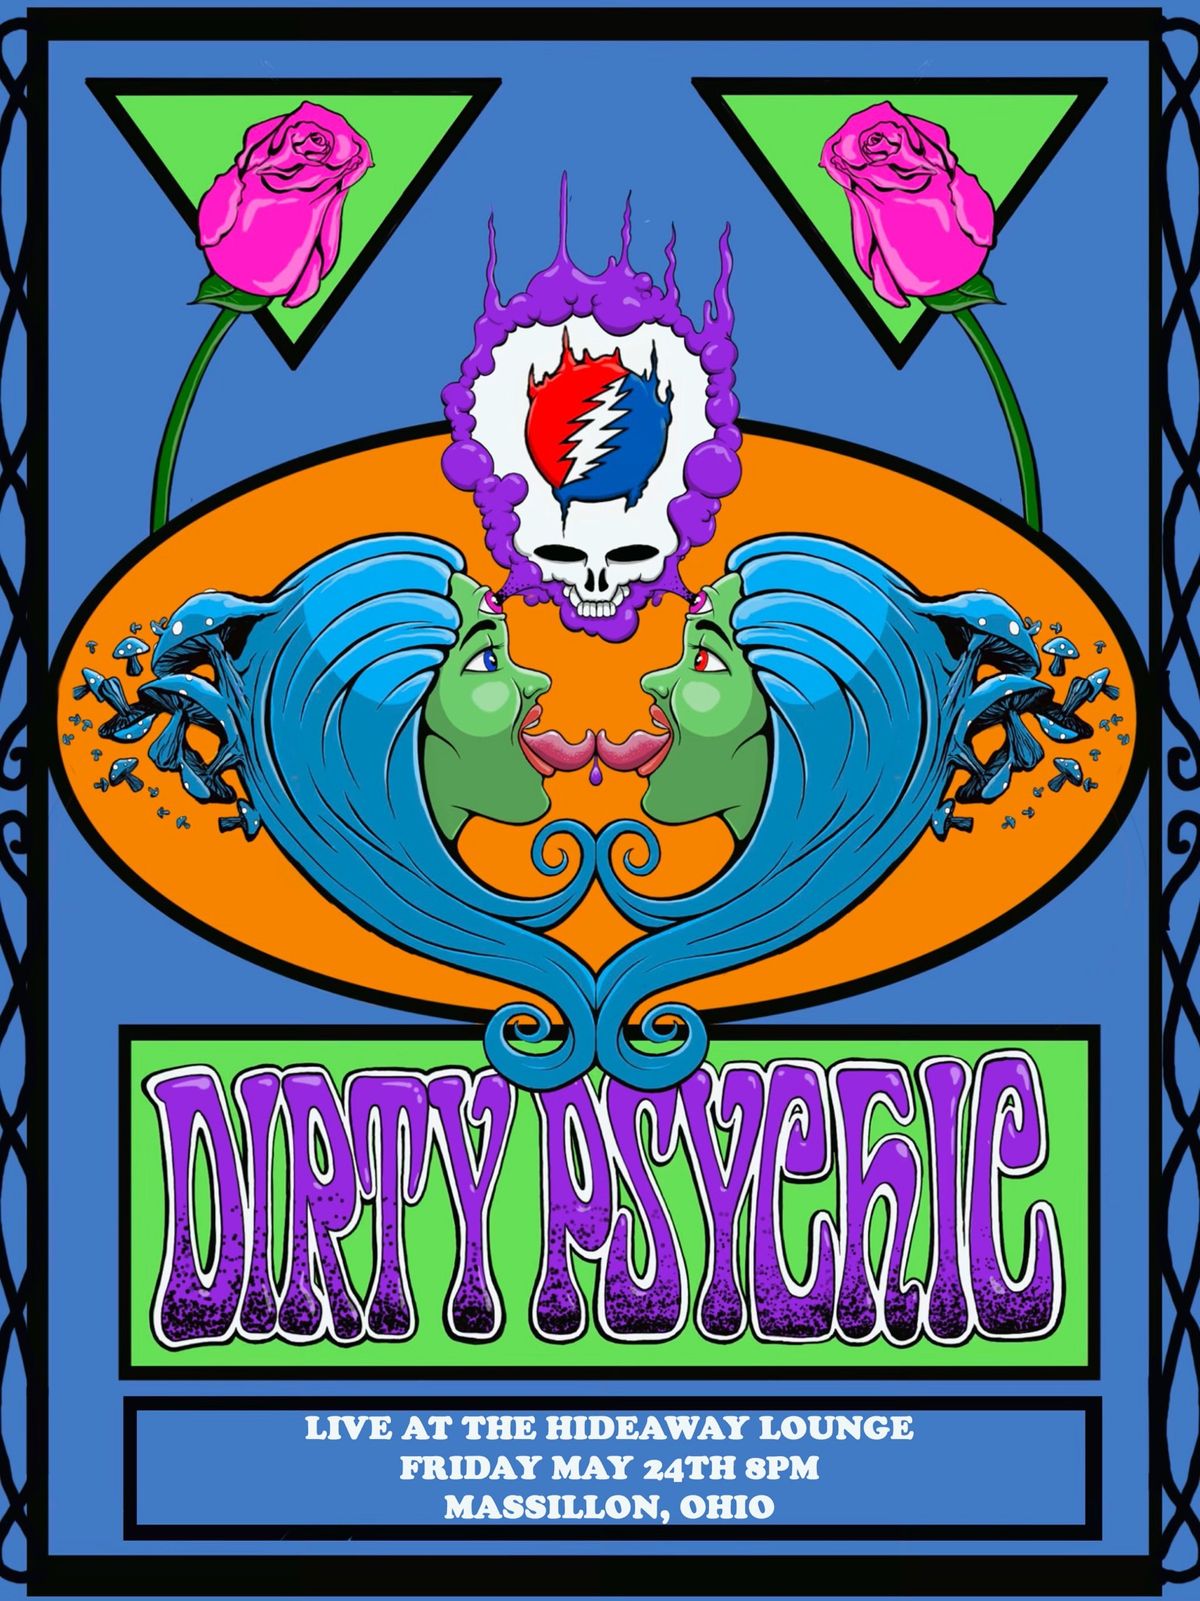 Grateful Dead Tribute- Dirty Psychic- live in Massillon at The Hideaway. 